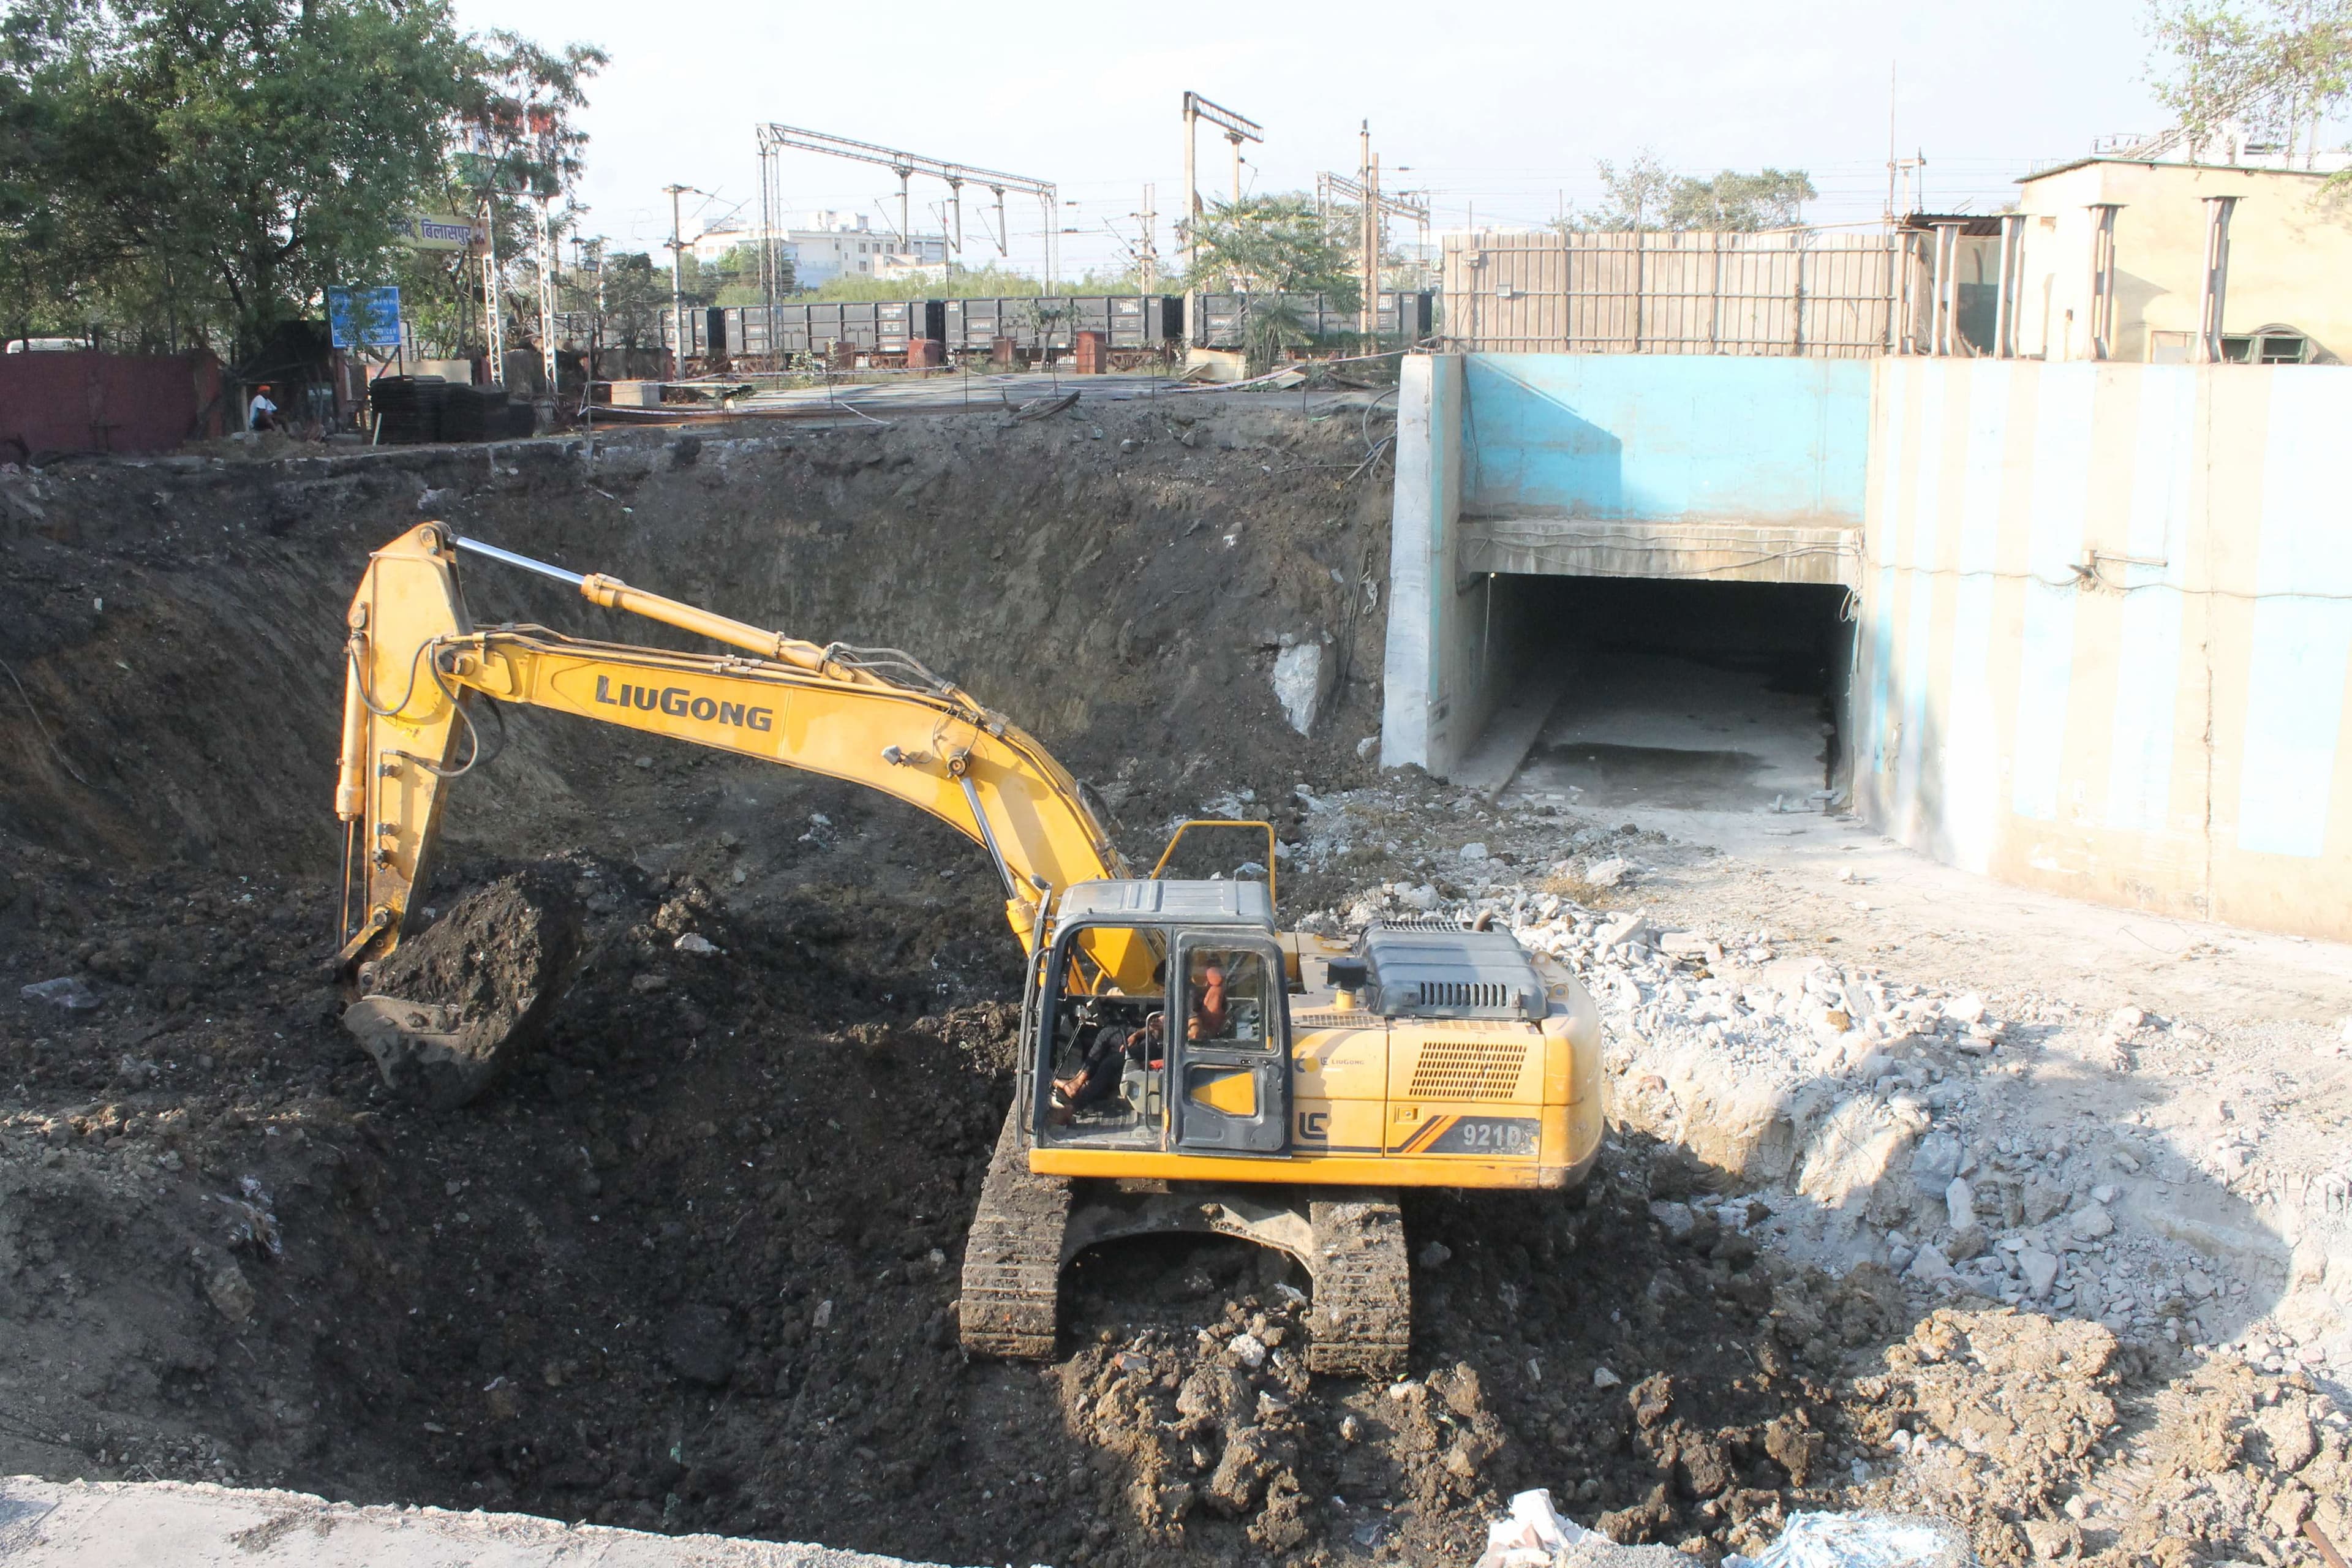 Construction work for the underpass